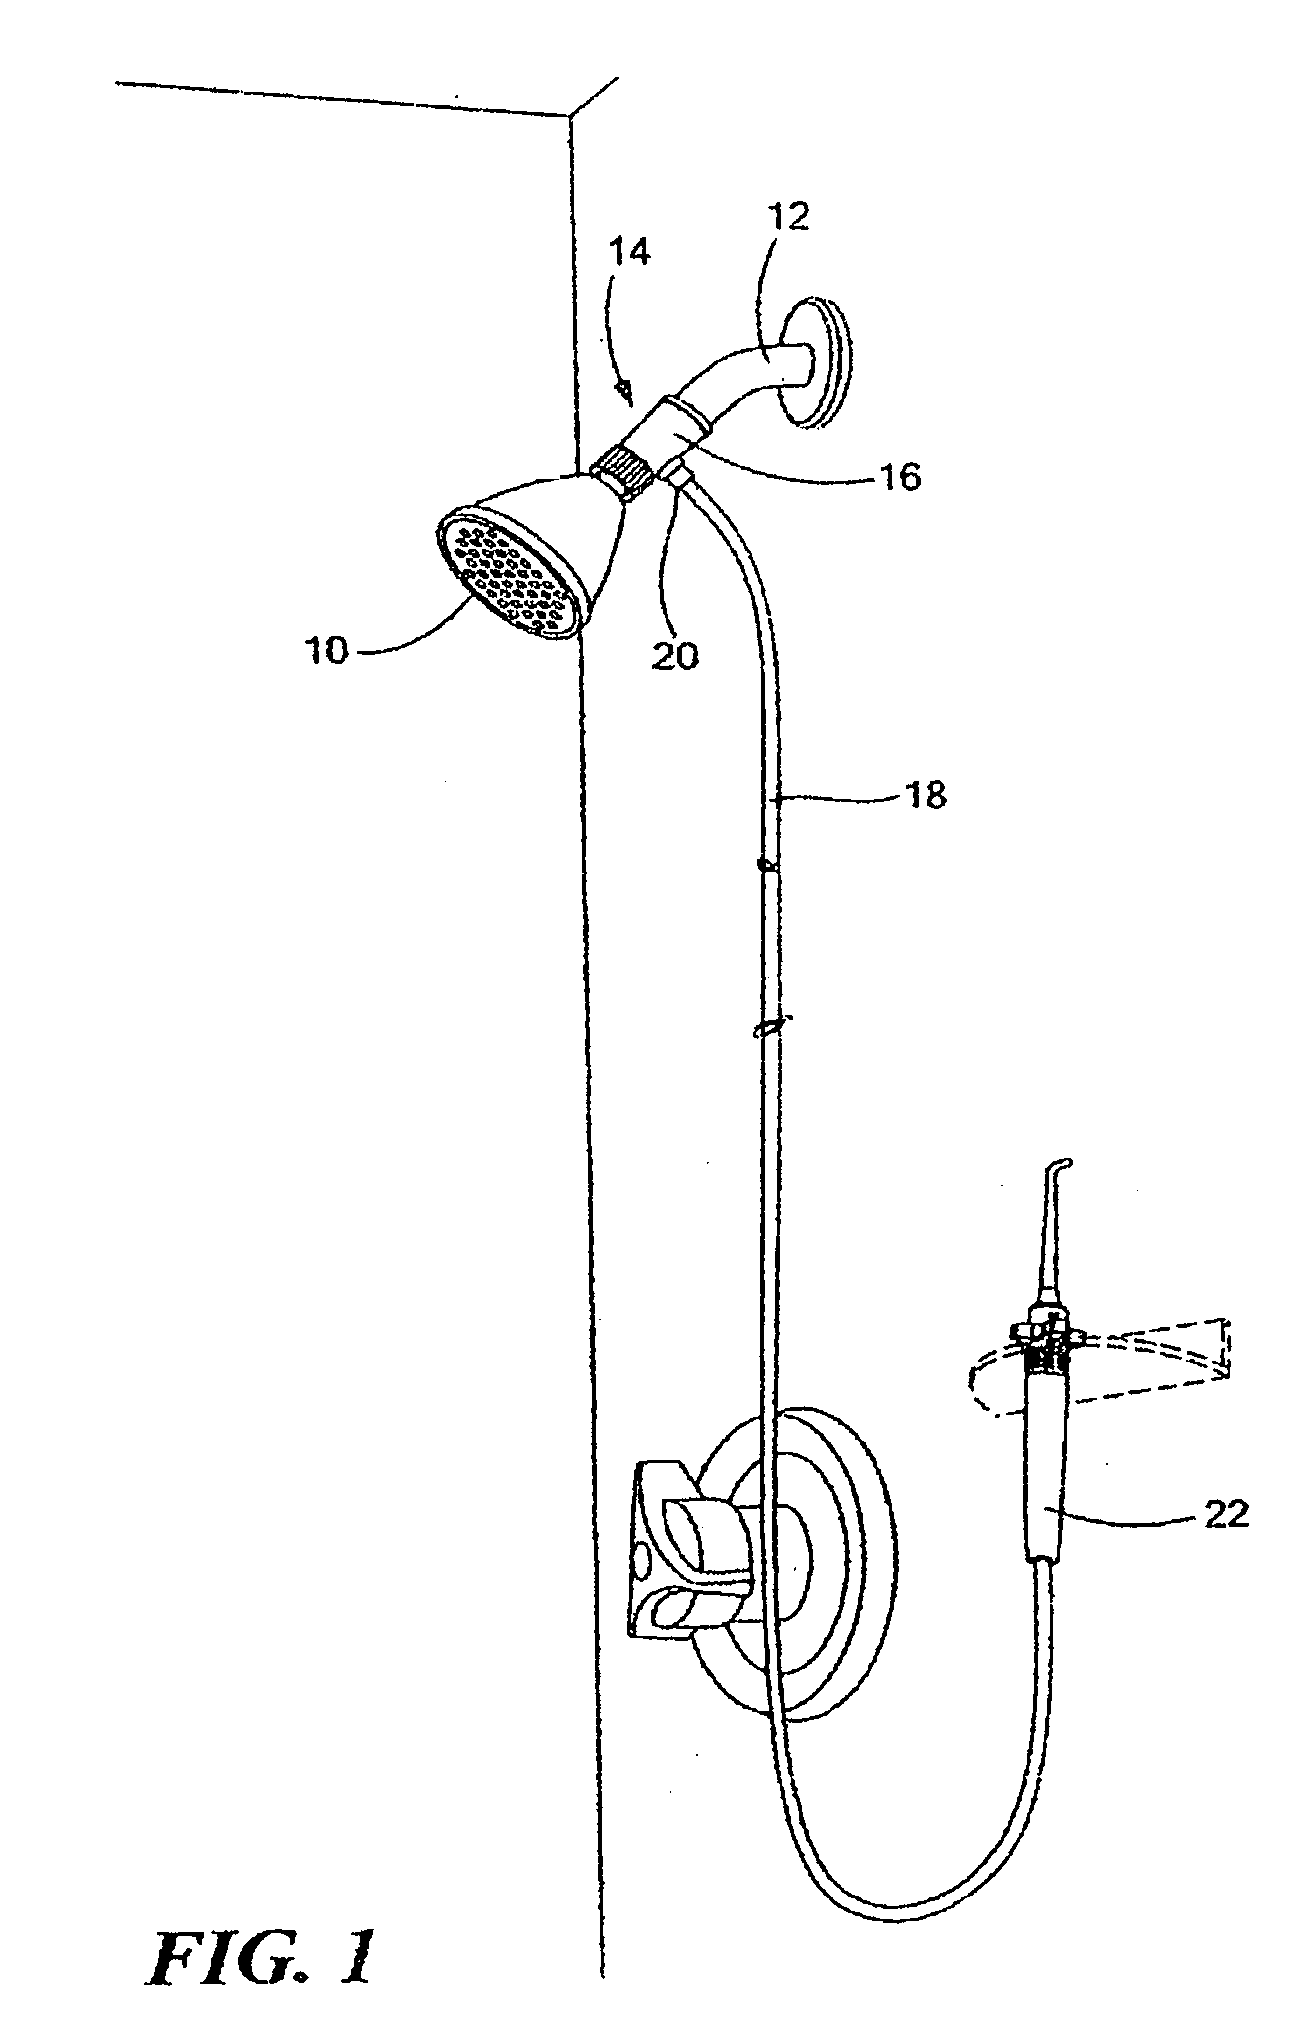 Shower head attachment for mixing liquids use to clean teeth